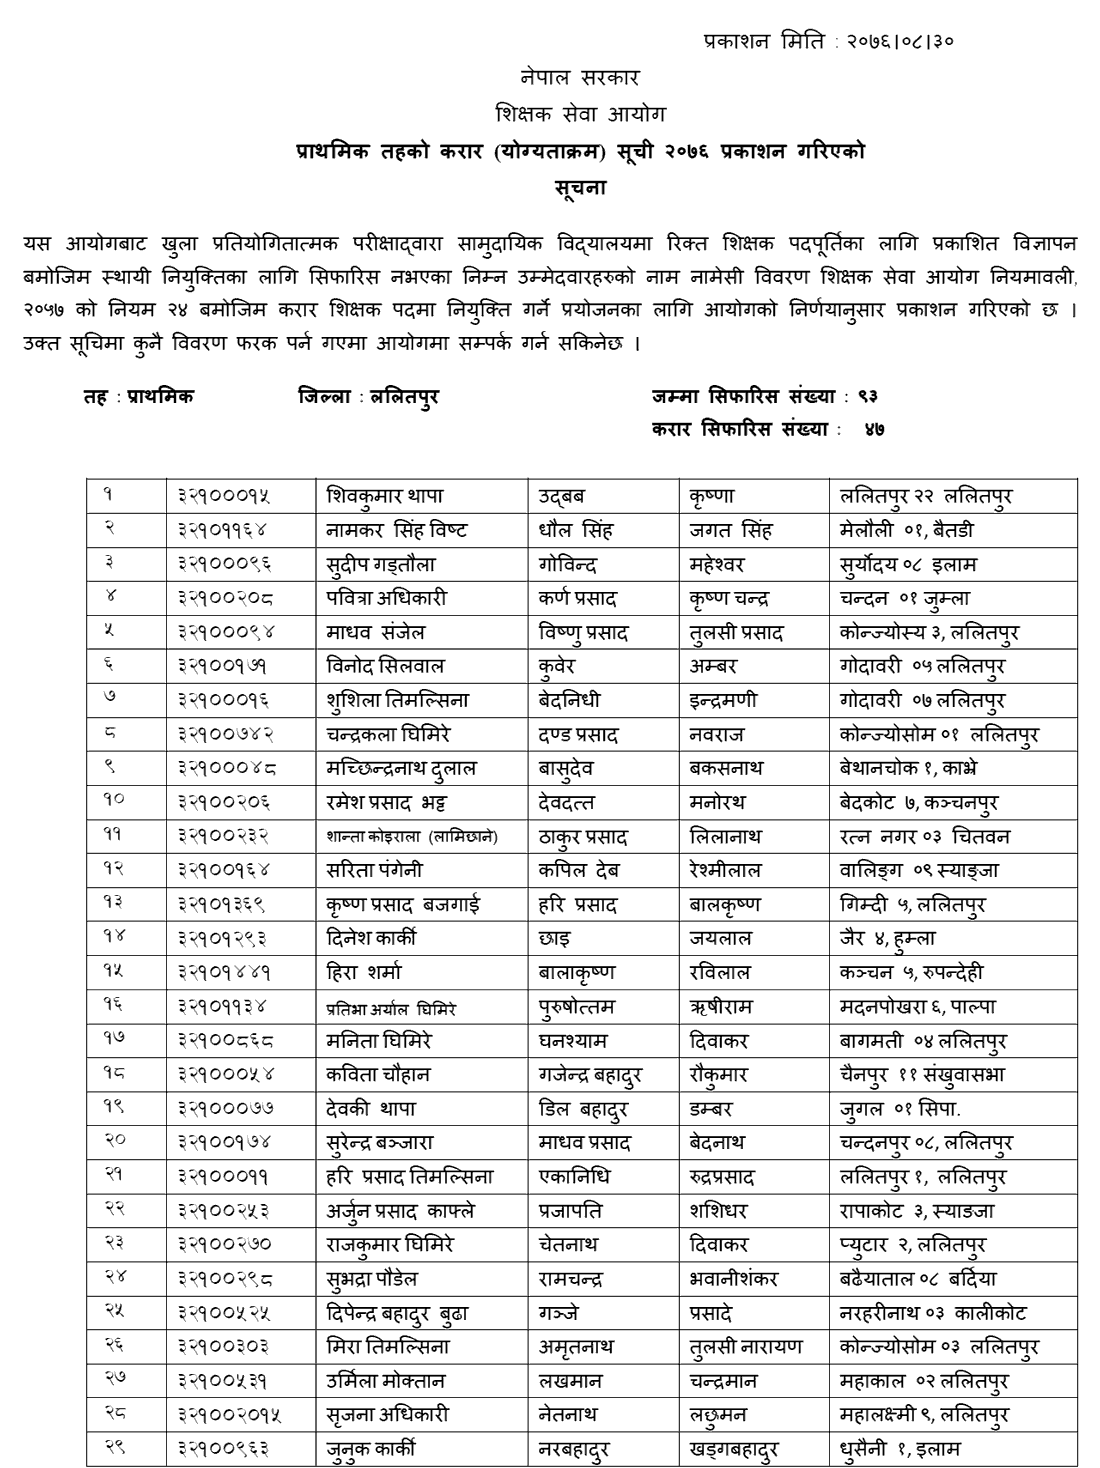 TSC Published Primary Level Contract List of Lalitpur